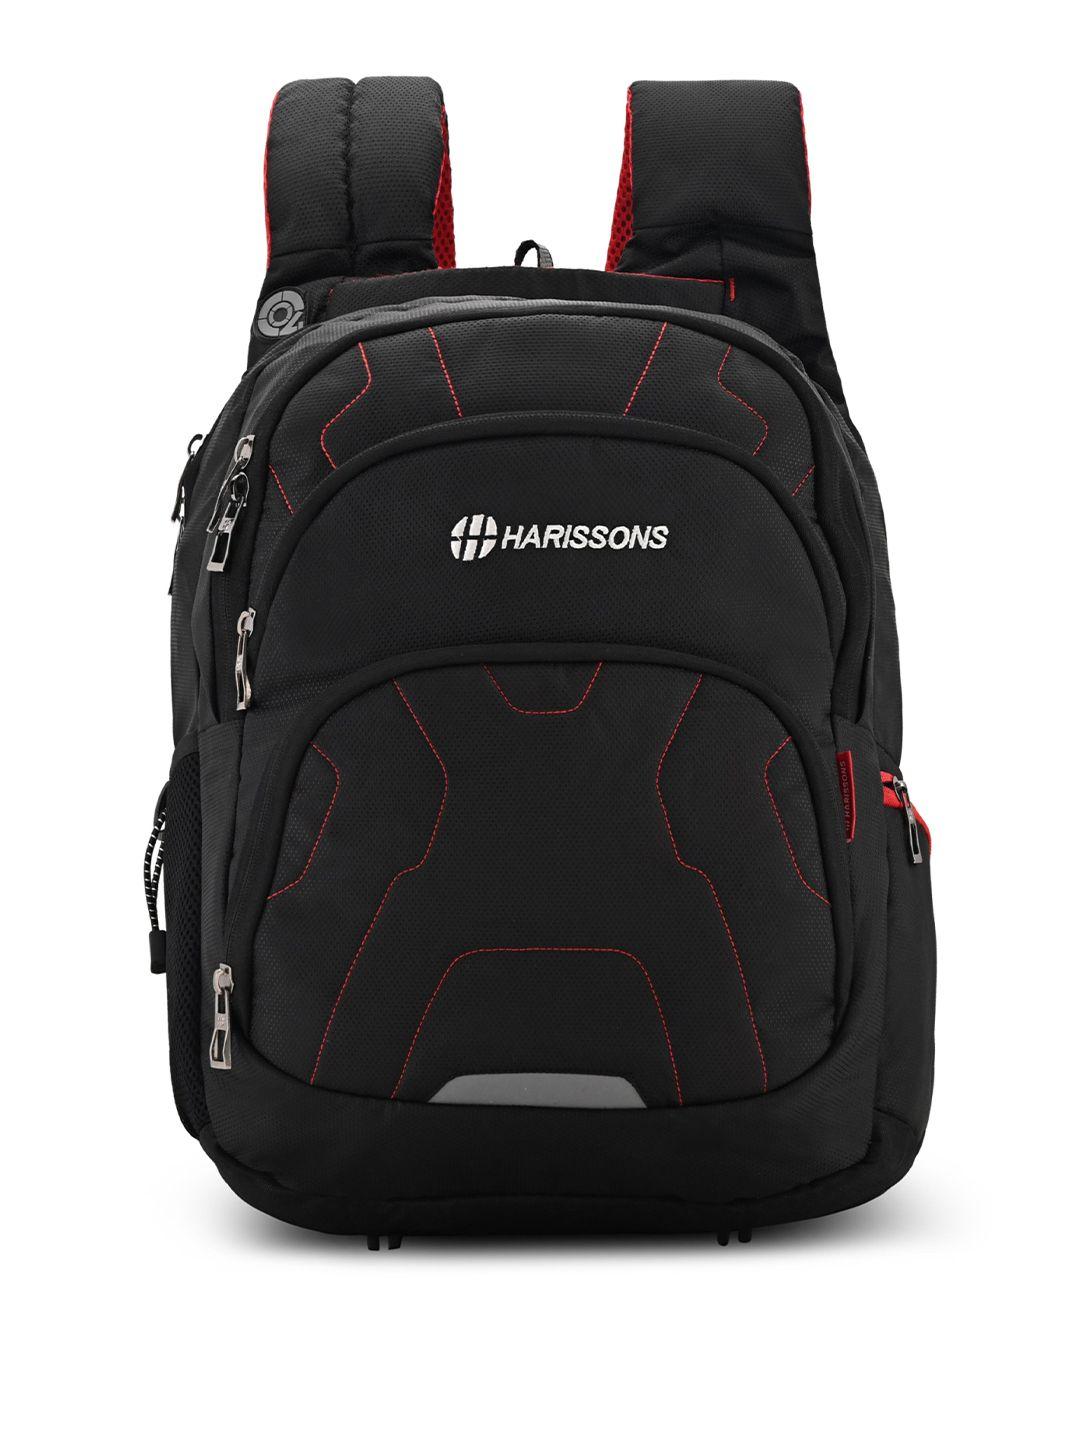 harissons unisex black & red backpack with reflective strip